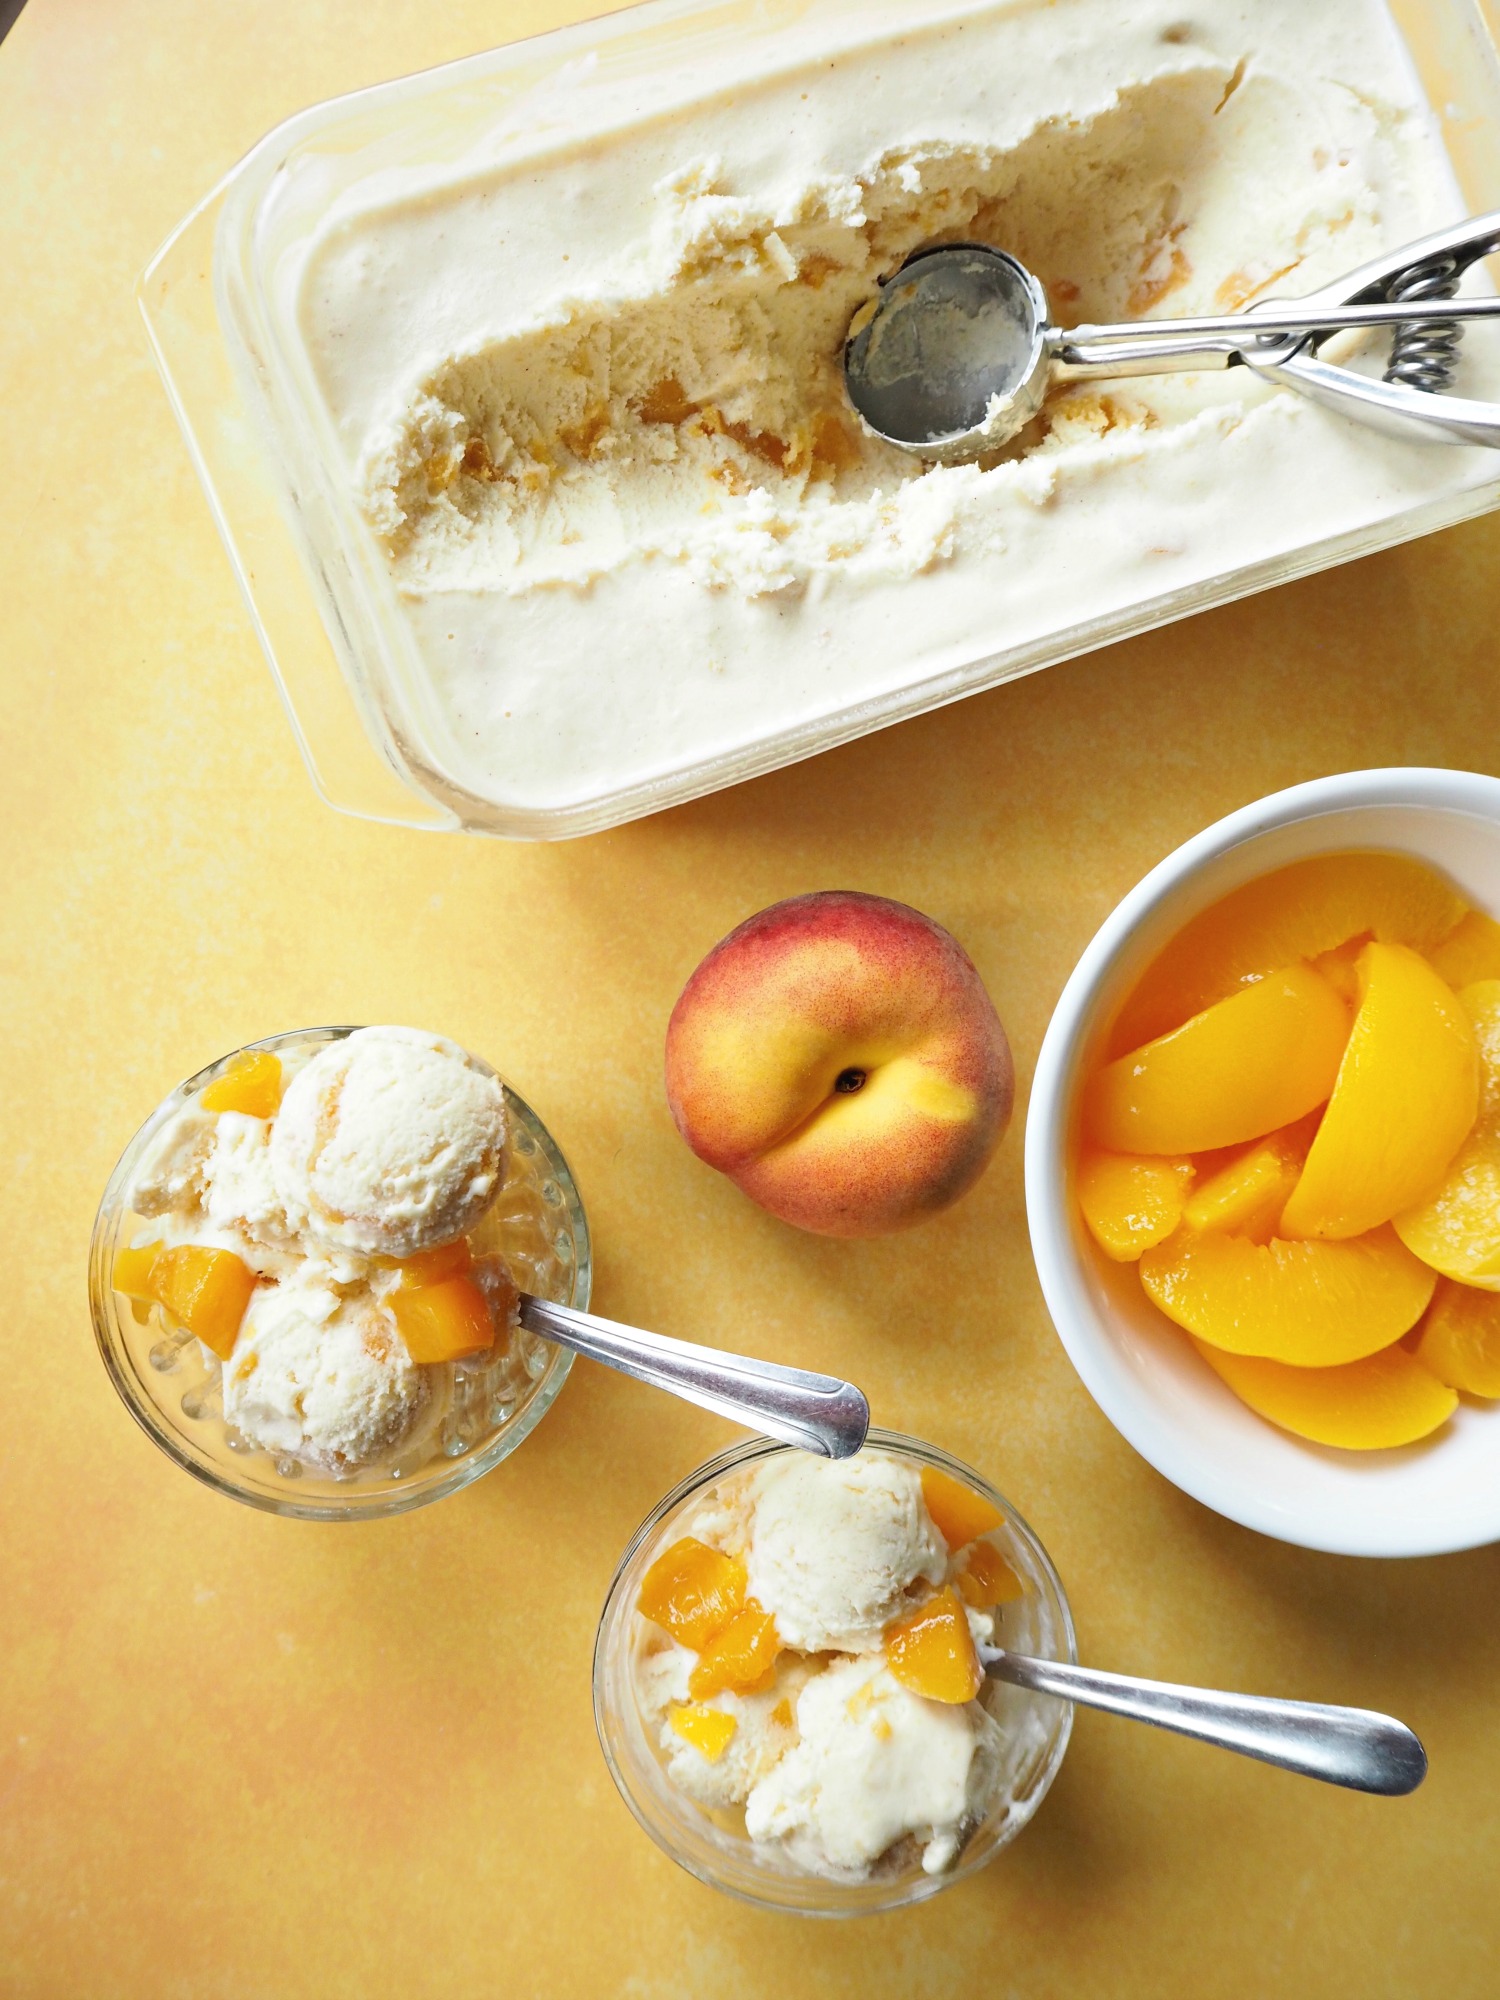 A tub of homemade ice cream with an ice cream scoop in it, next to a couple of bowls of peach ice cream, a whole peach and a bowl of peach slices.